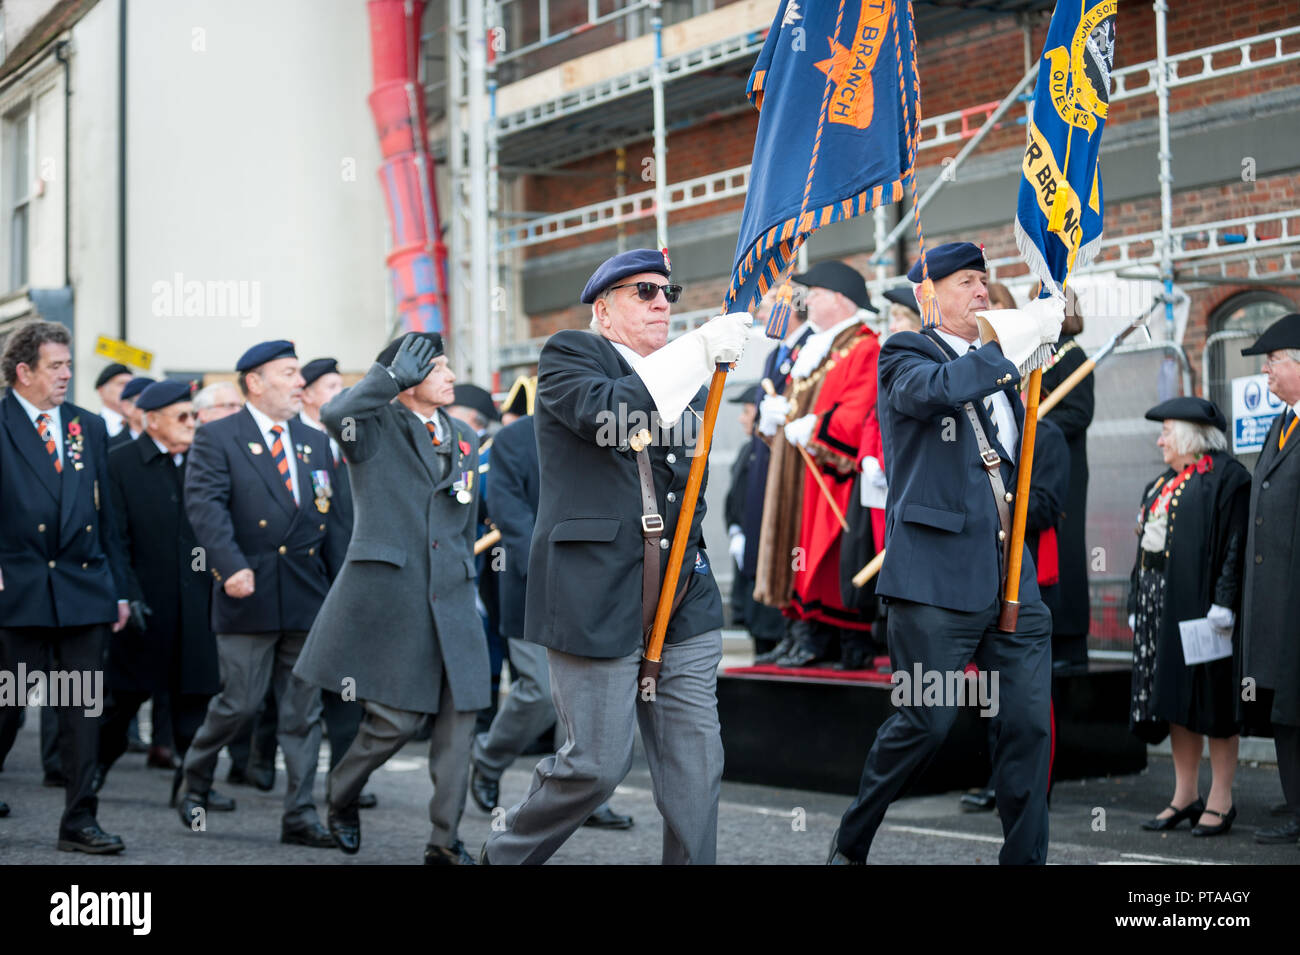 Remembrance Sunday parade, veterans carrying standards march through the city of Chichester, West Sussex, UK. Stock Photo